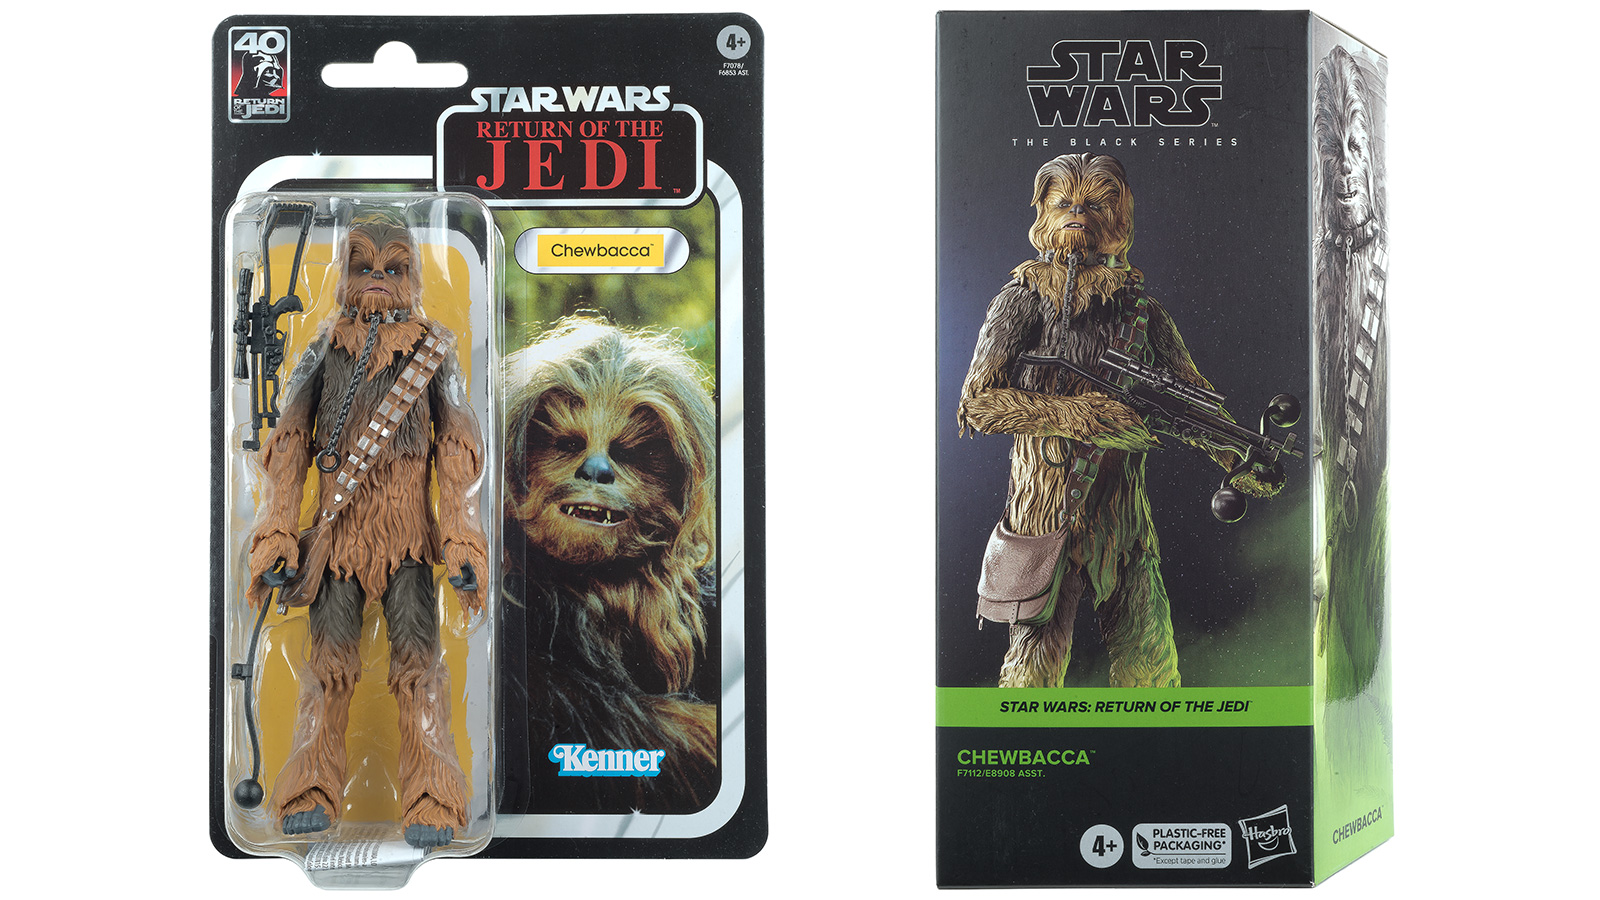 Slight Change Between TBS 6-Inch Carded ROTJ Chewbacca & Boxed ROTJ Chewbacca Figures